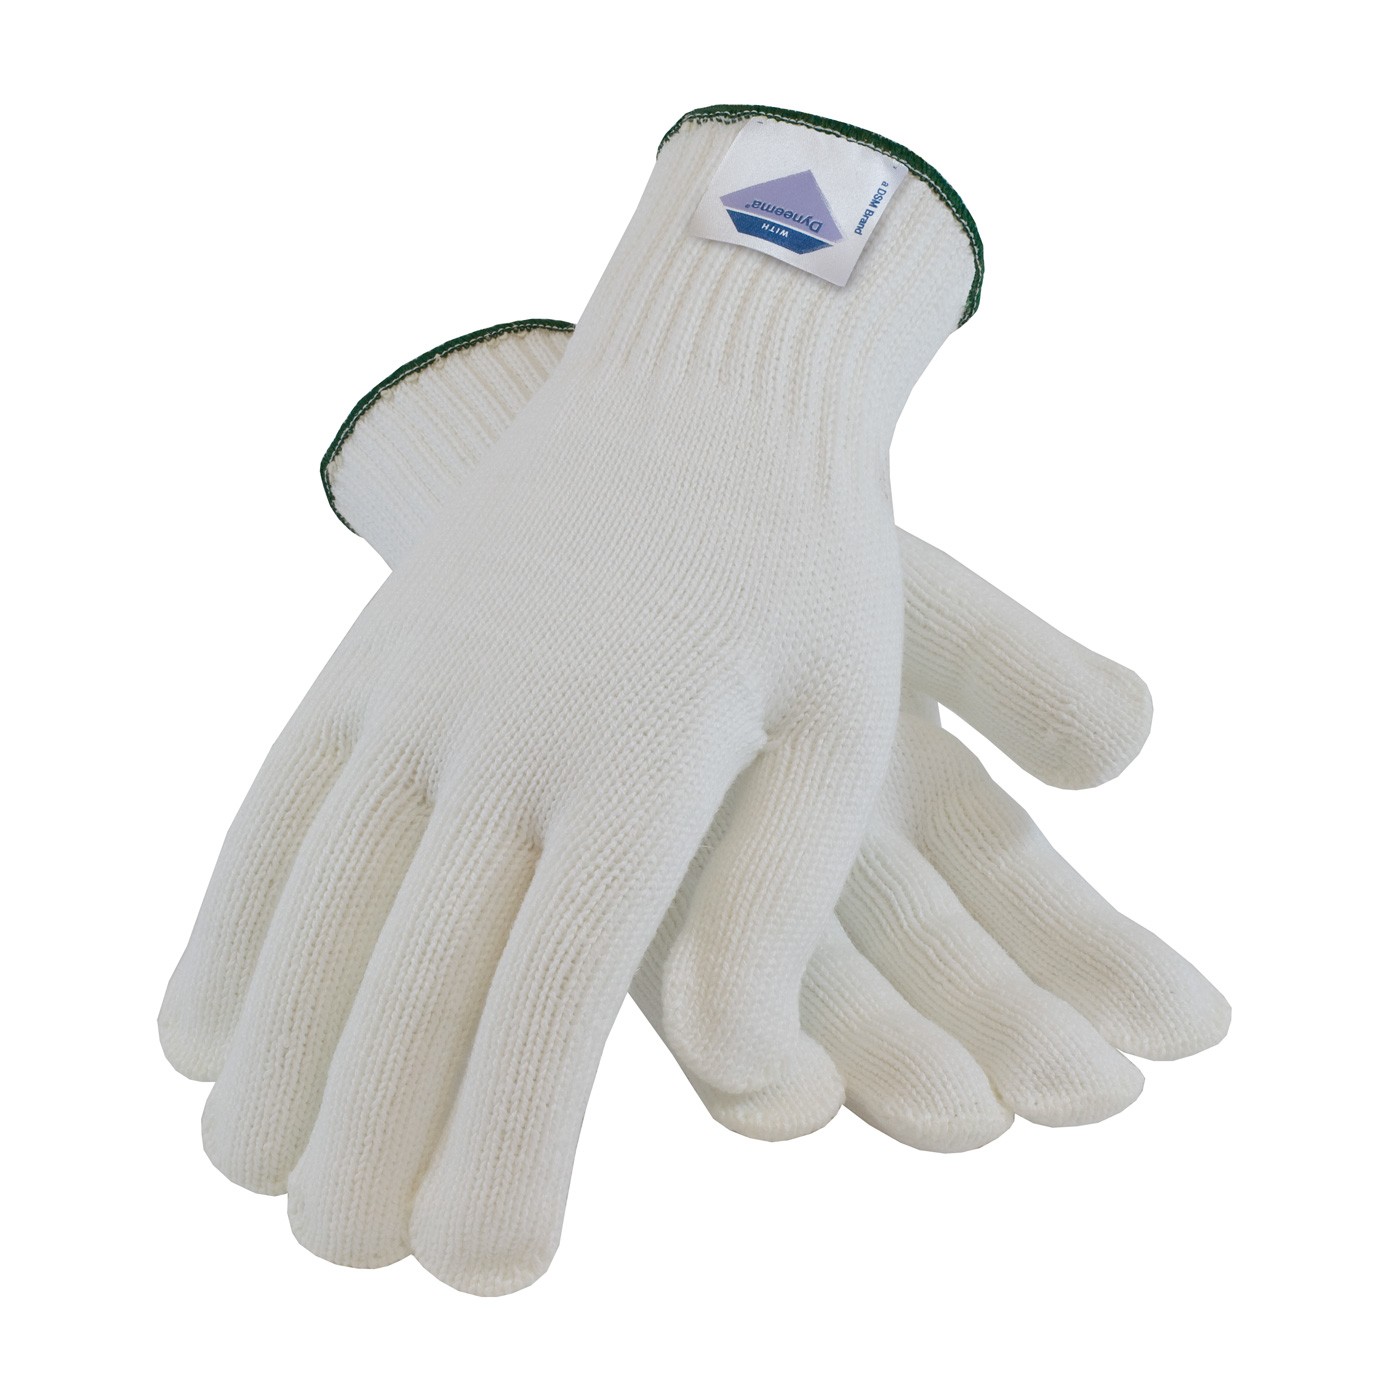 Gloves with Spun Dyneema, 7 Gauge, White, Heavy Weight, ANSI2 Size X-Small